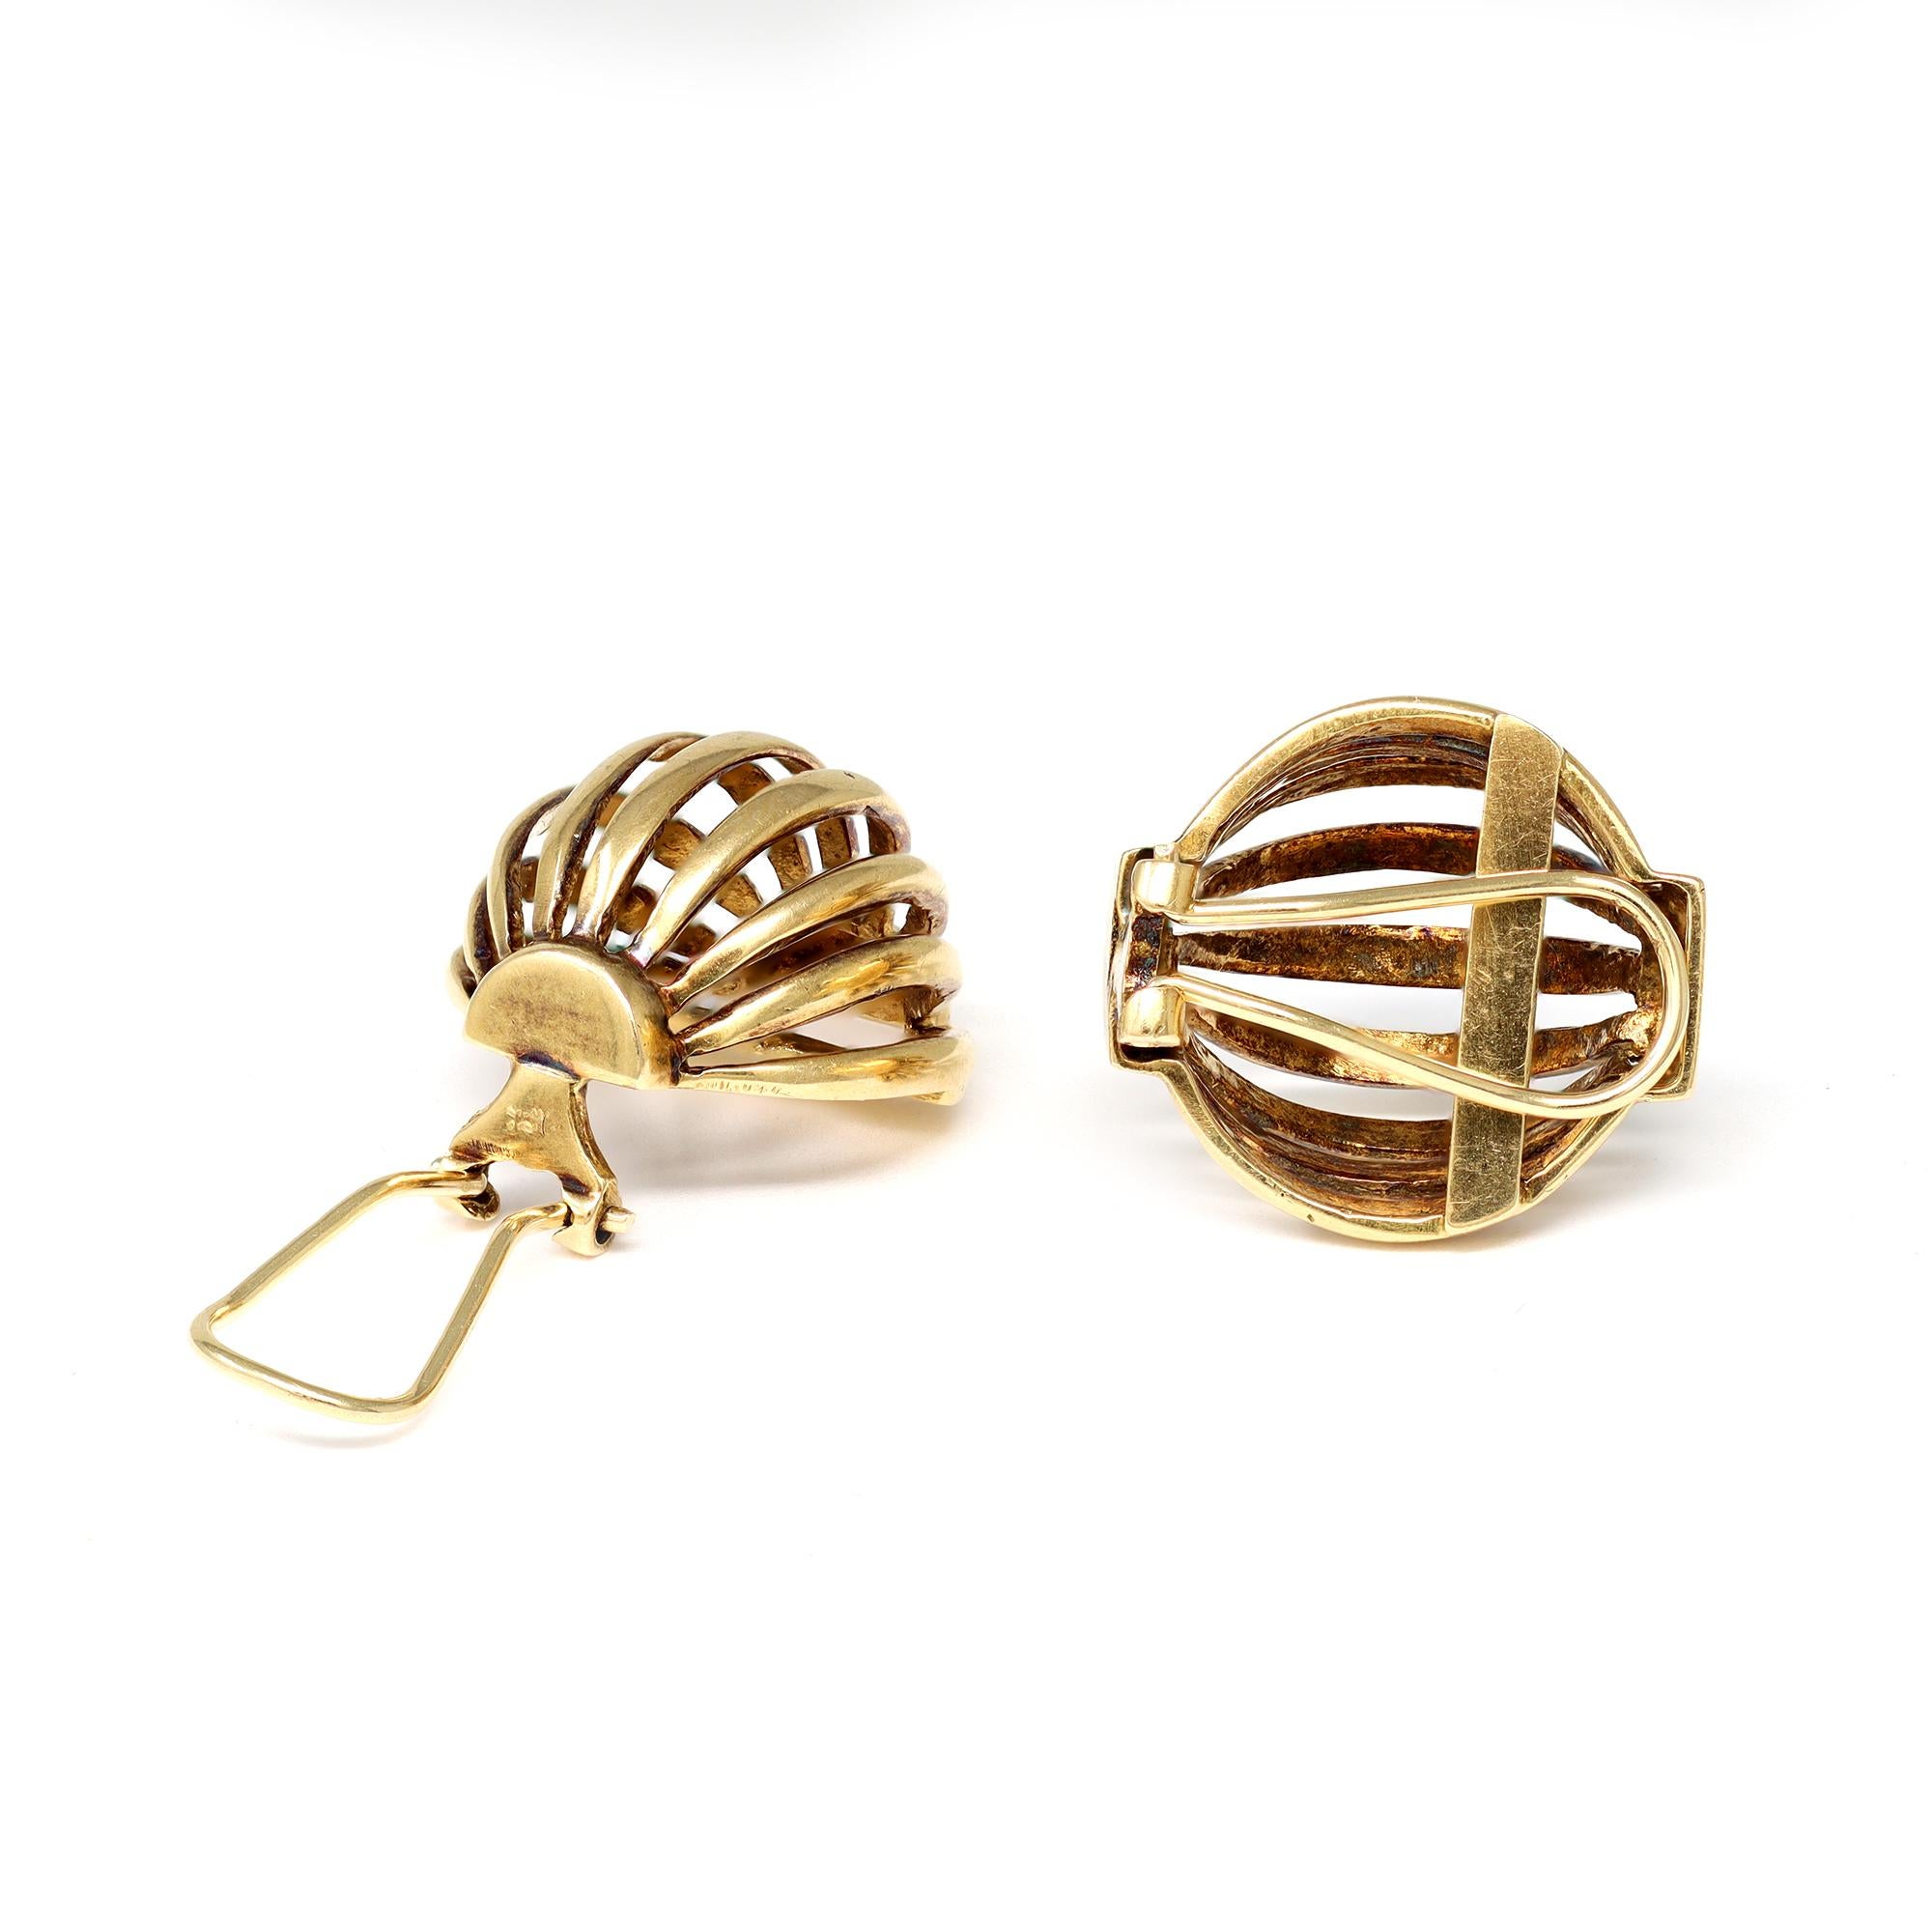 An original vintage pair of striped half sphere clip-on earrings circa 1940. The earrings are in very good condition and the design is subtle enough that they can be worn night and day. The gold presents minor marks of oxydation due to the age